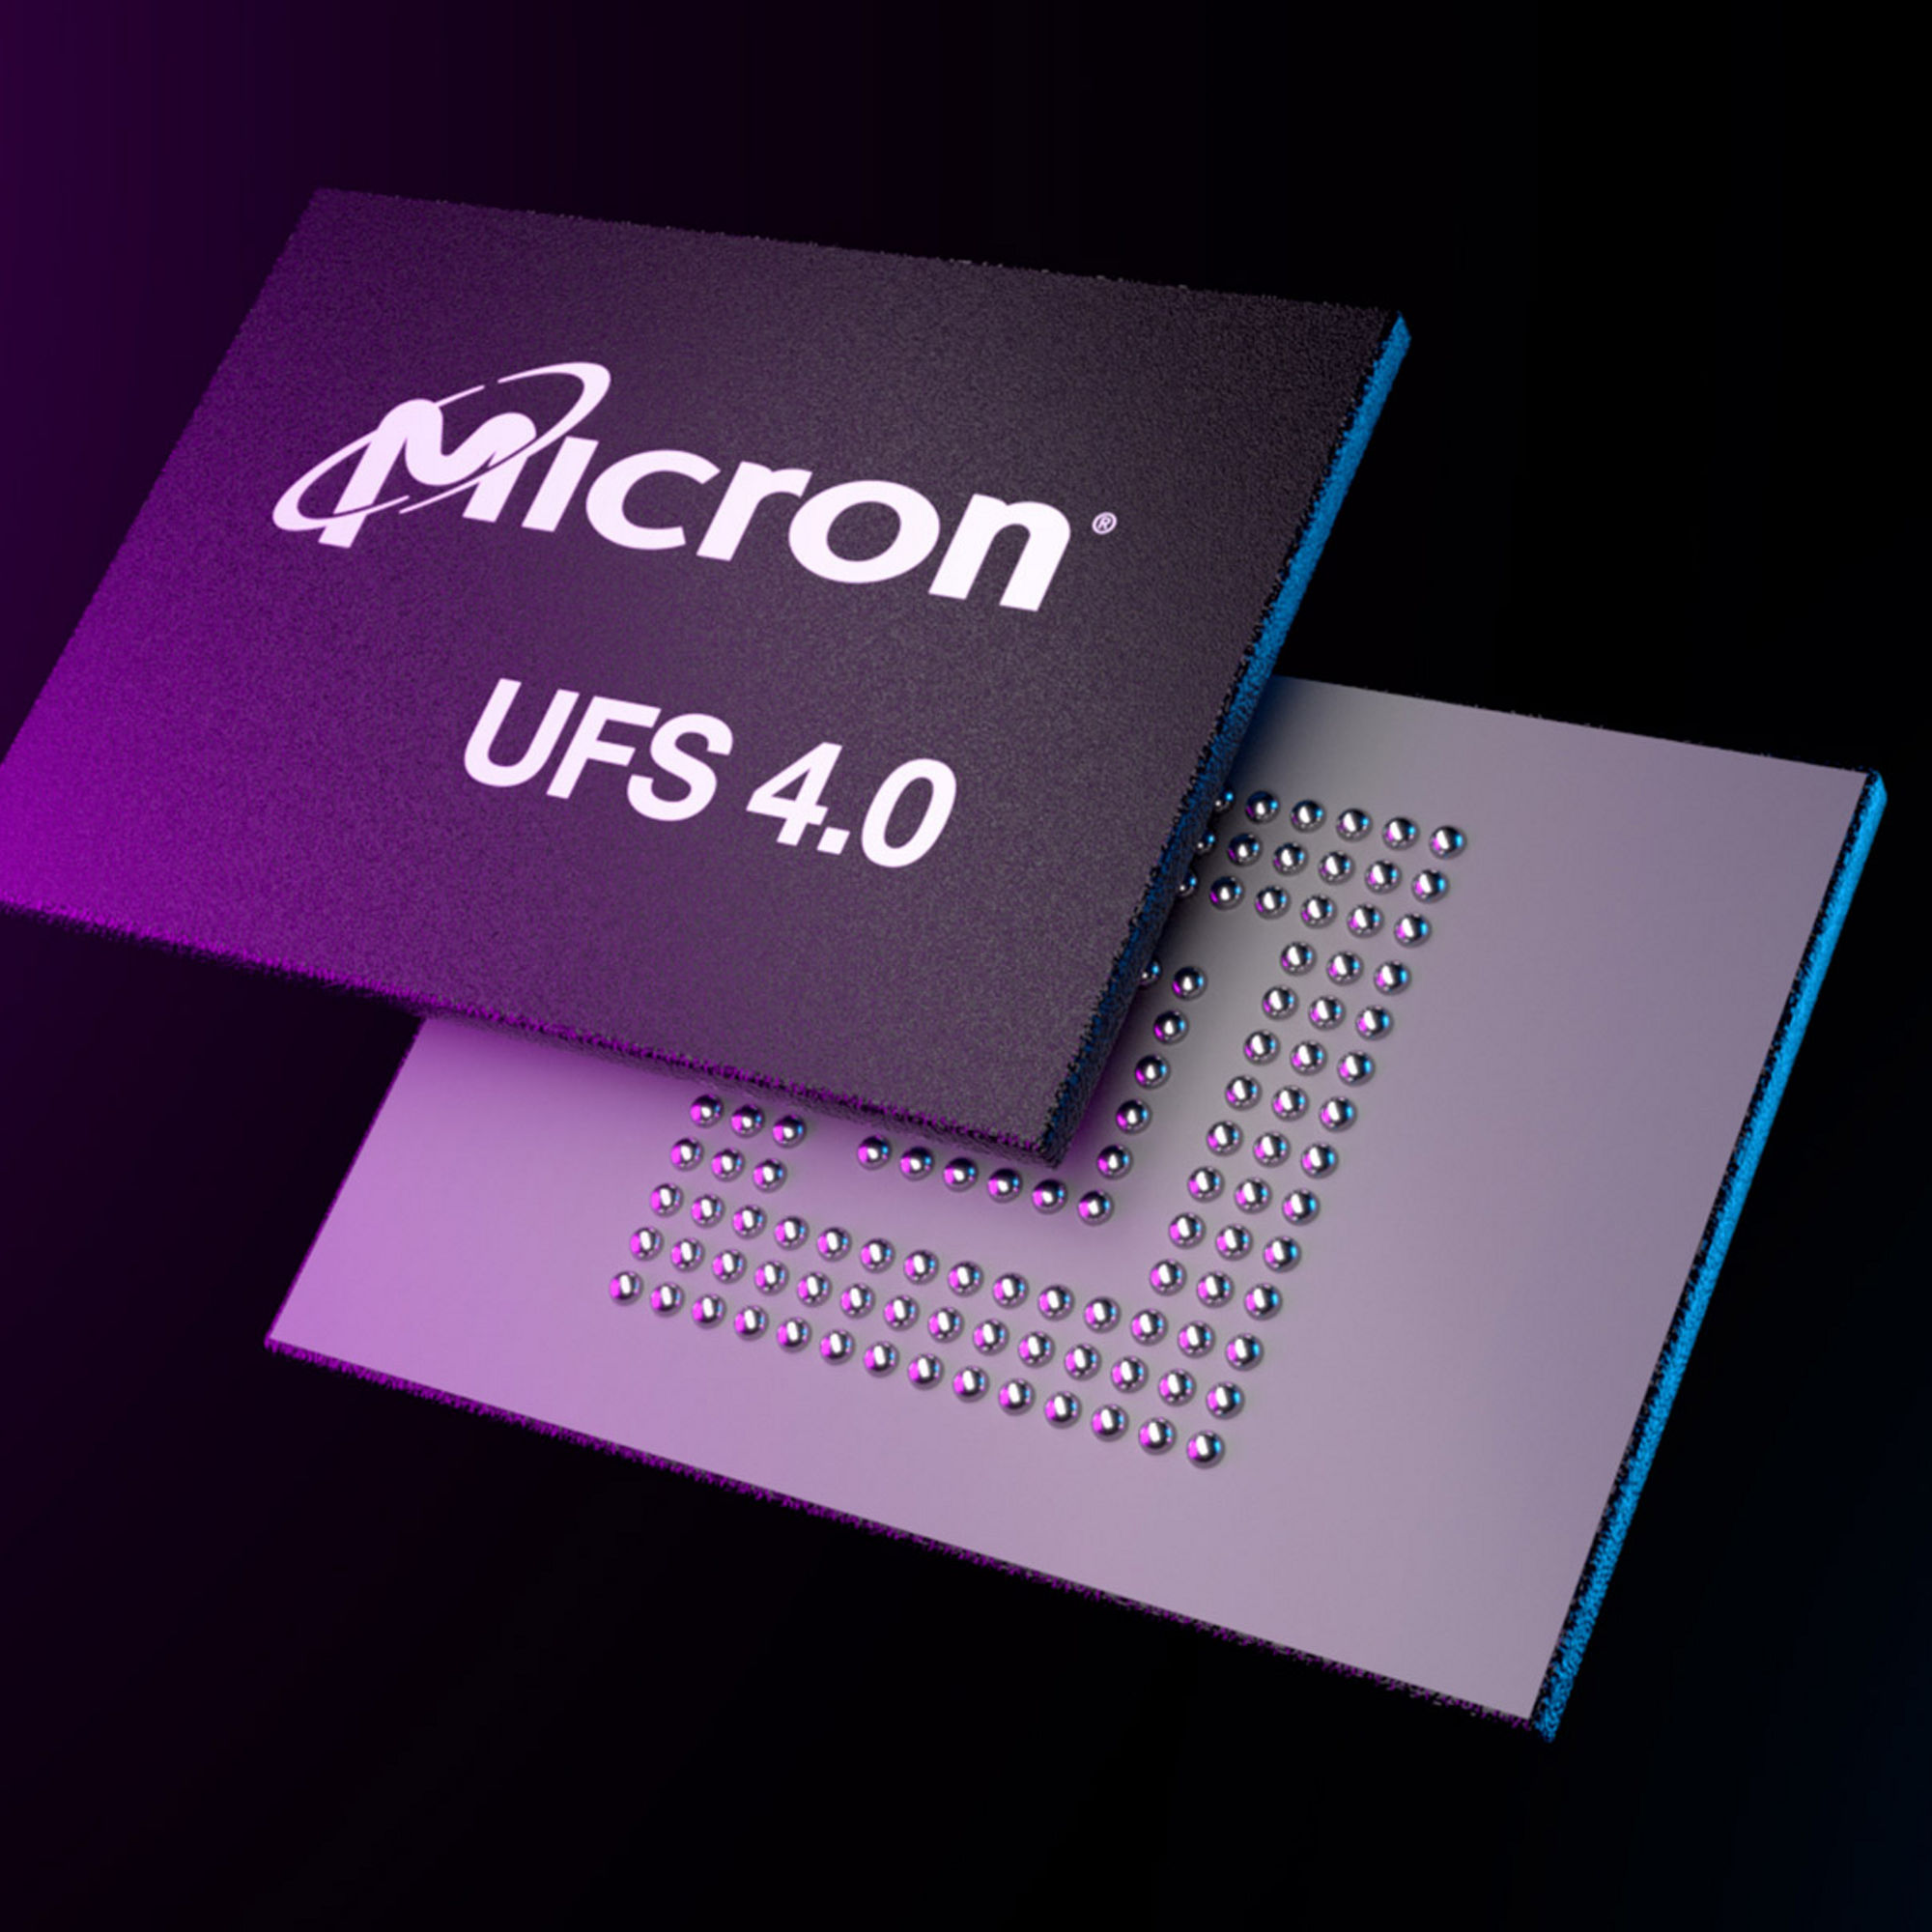 Micron UFS 4.0 chip front and back